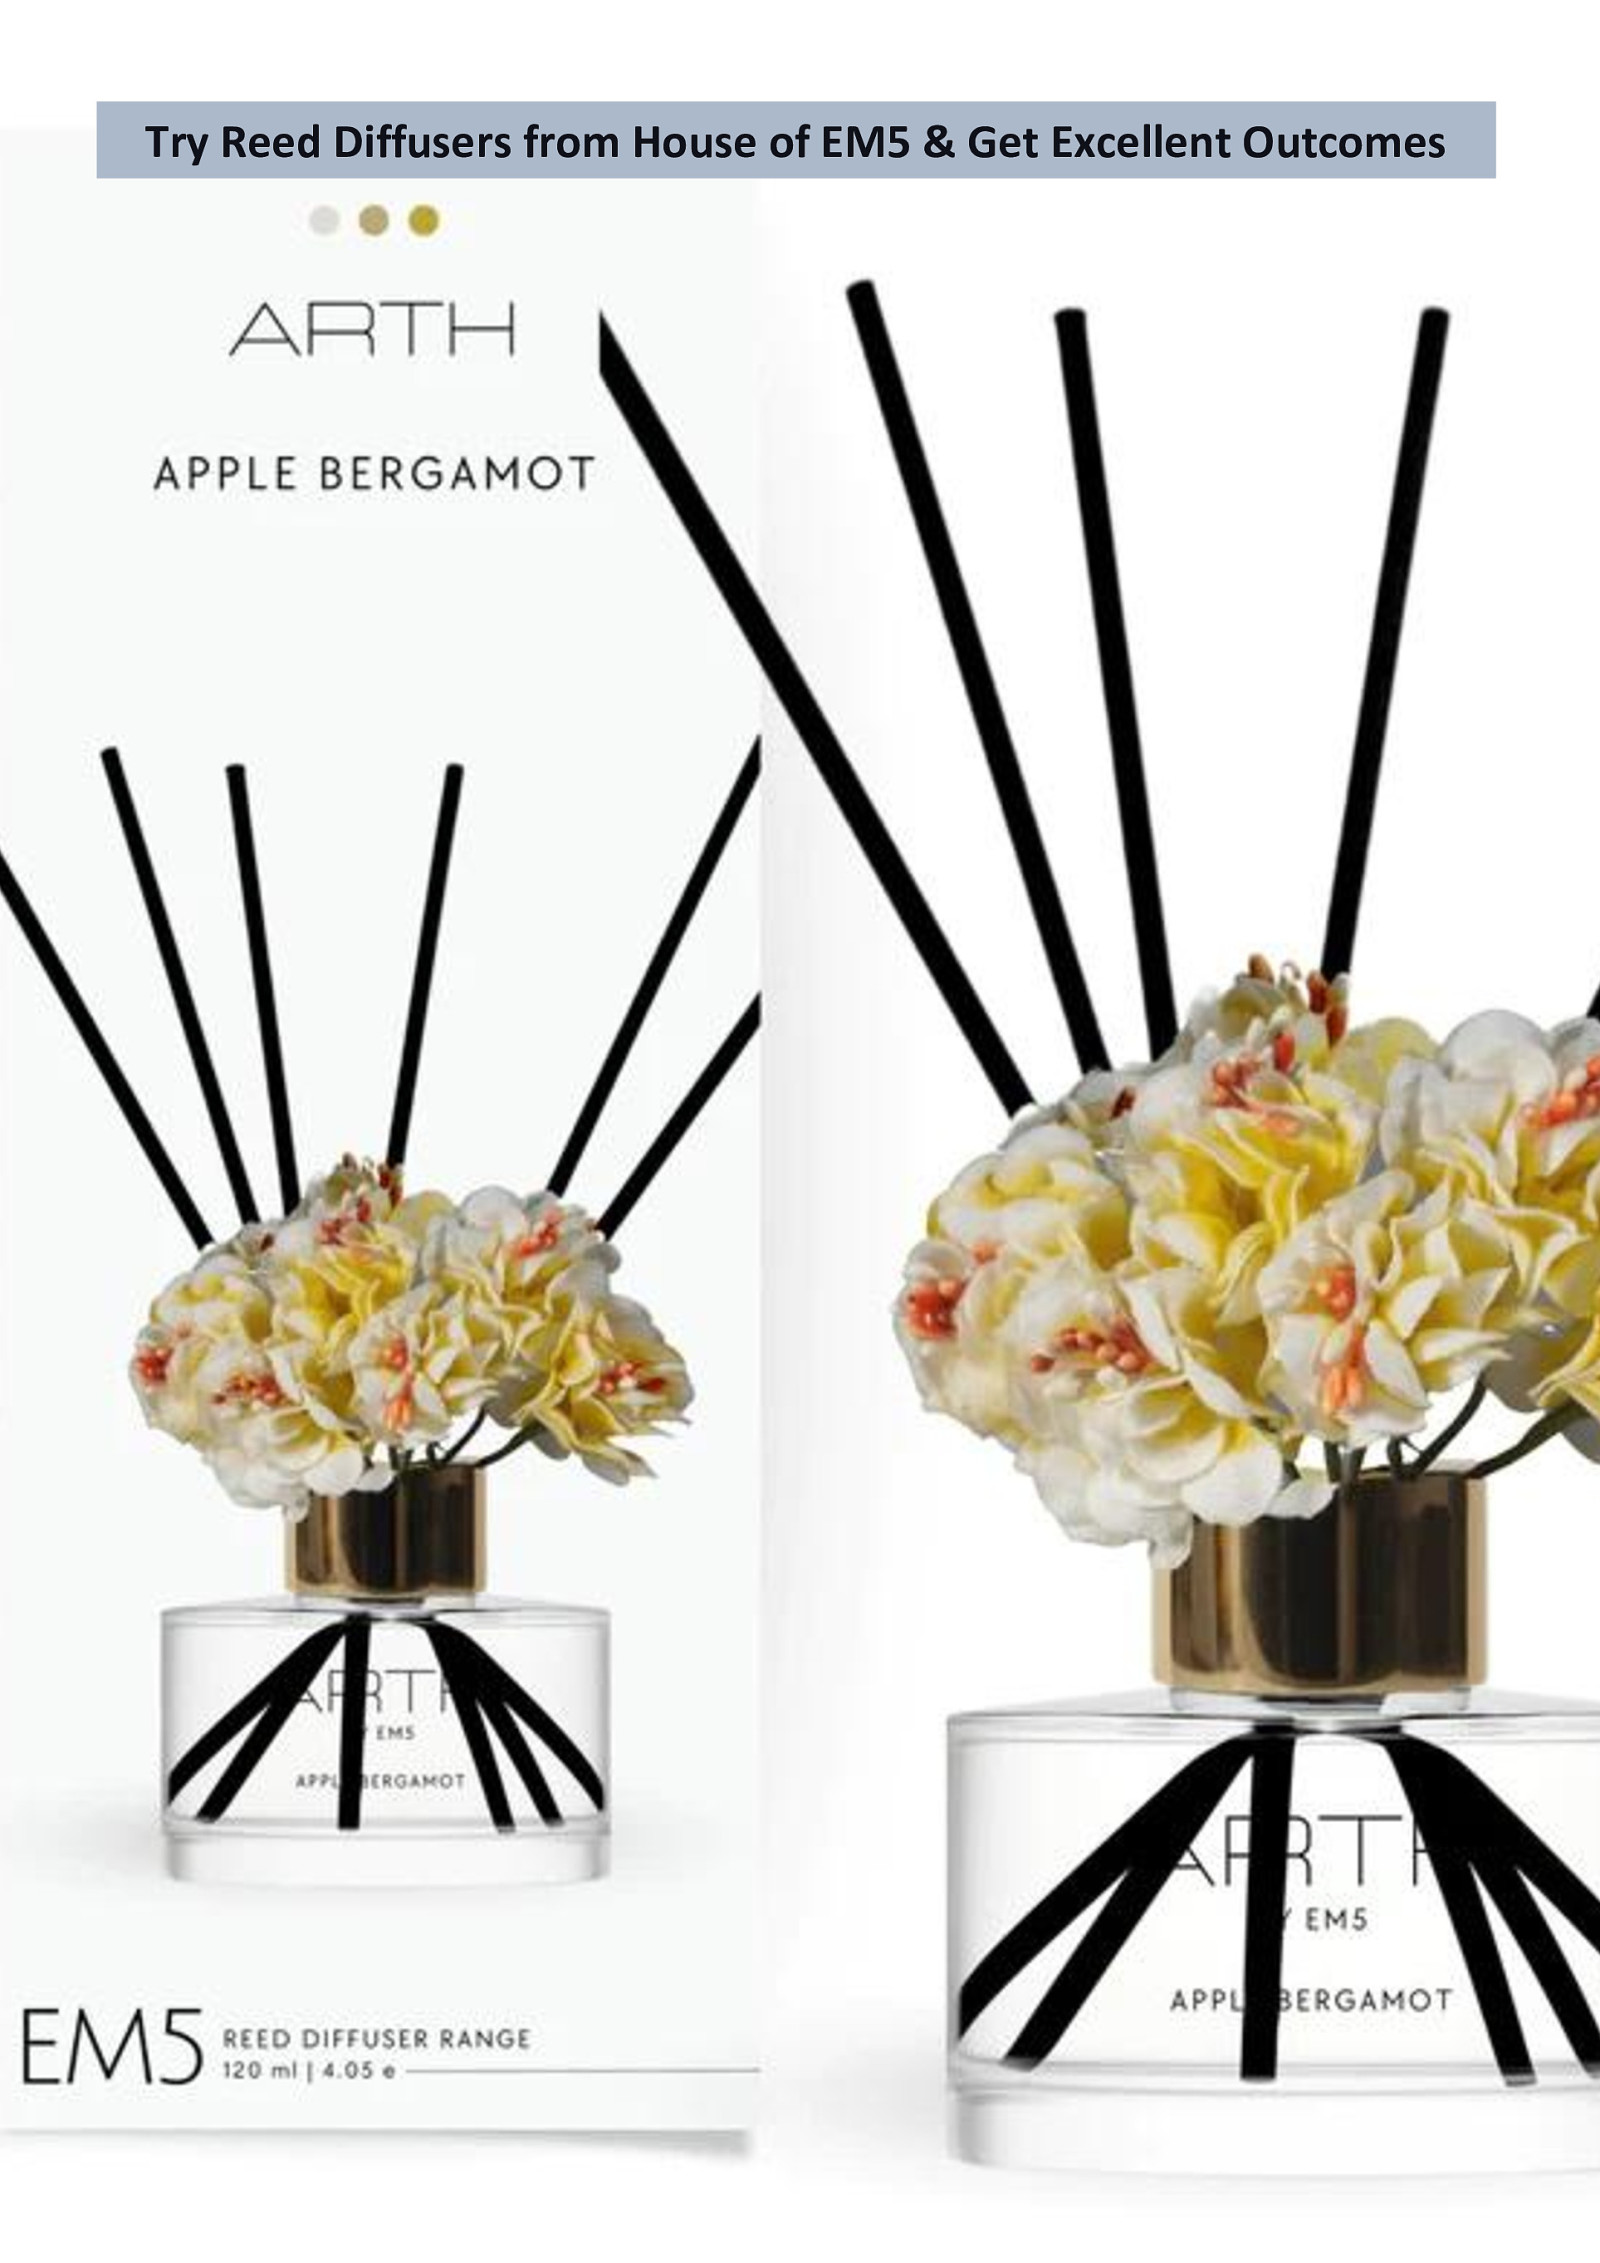 Try Reed Diffusers from House of EM5 & Get Excellent Outcomes